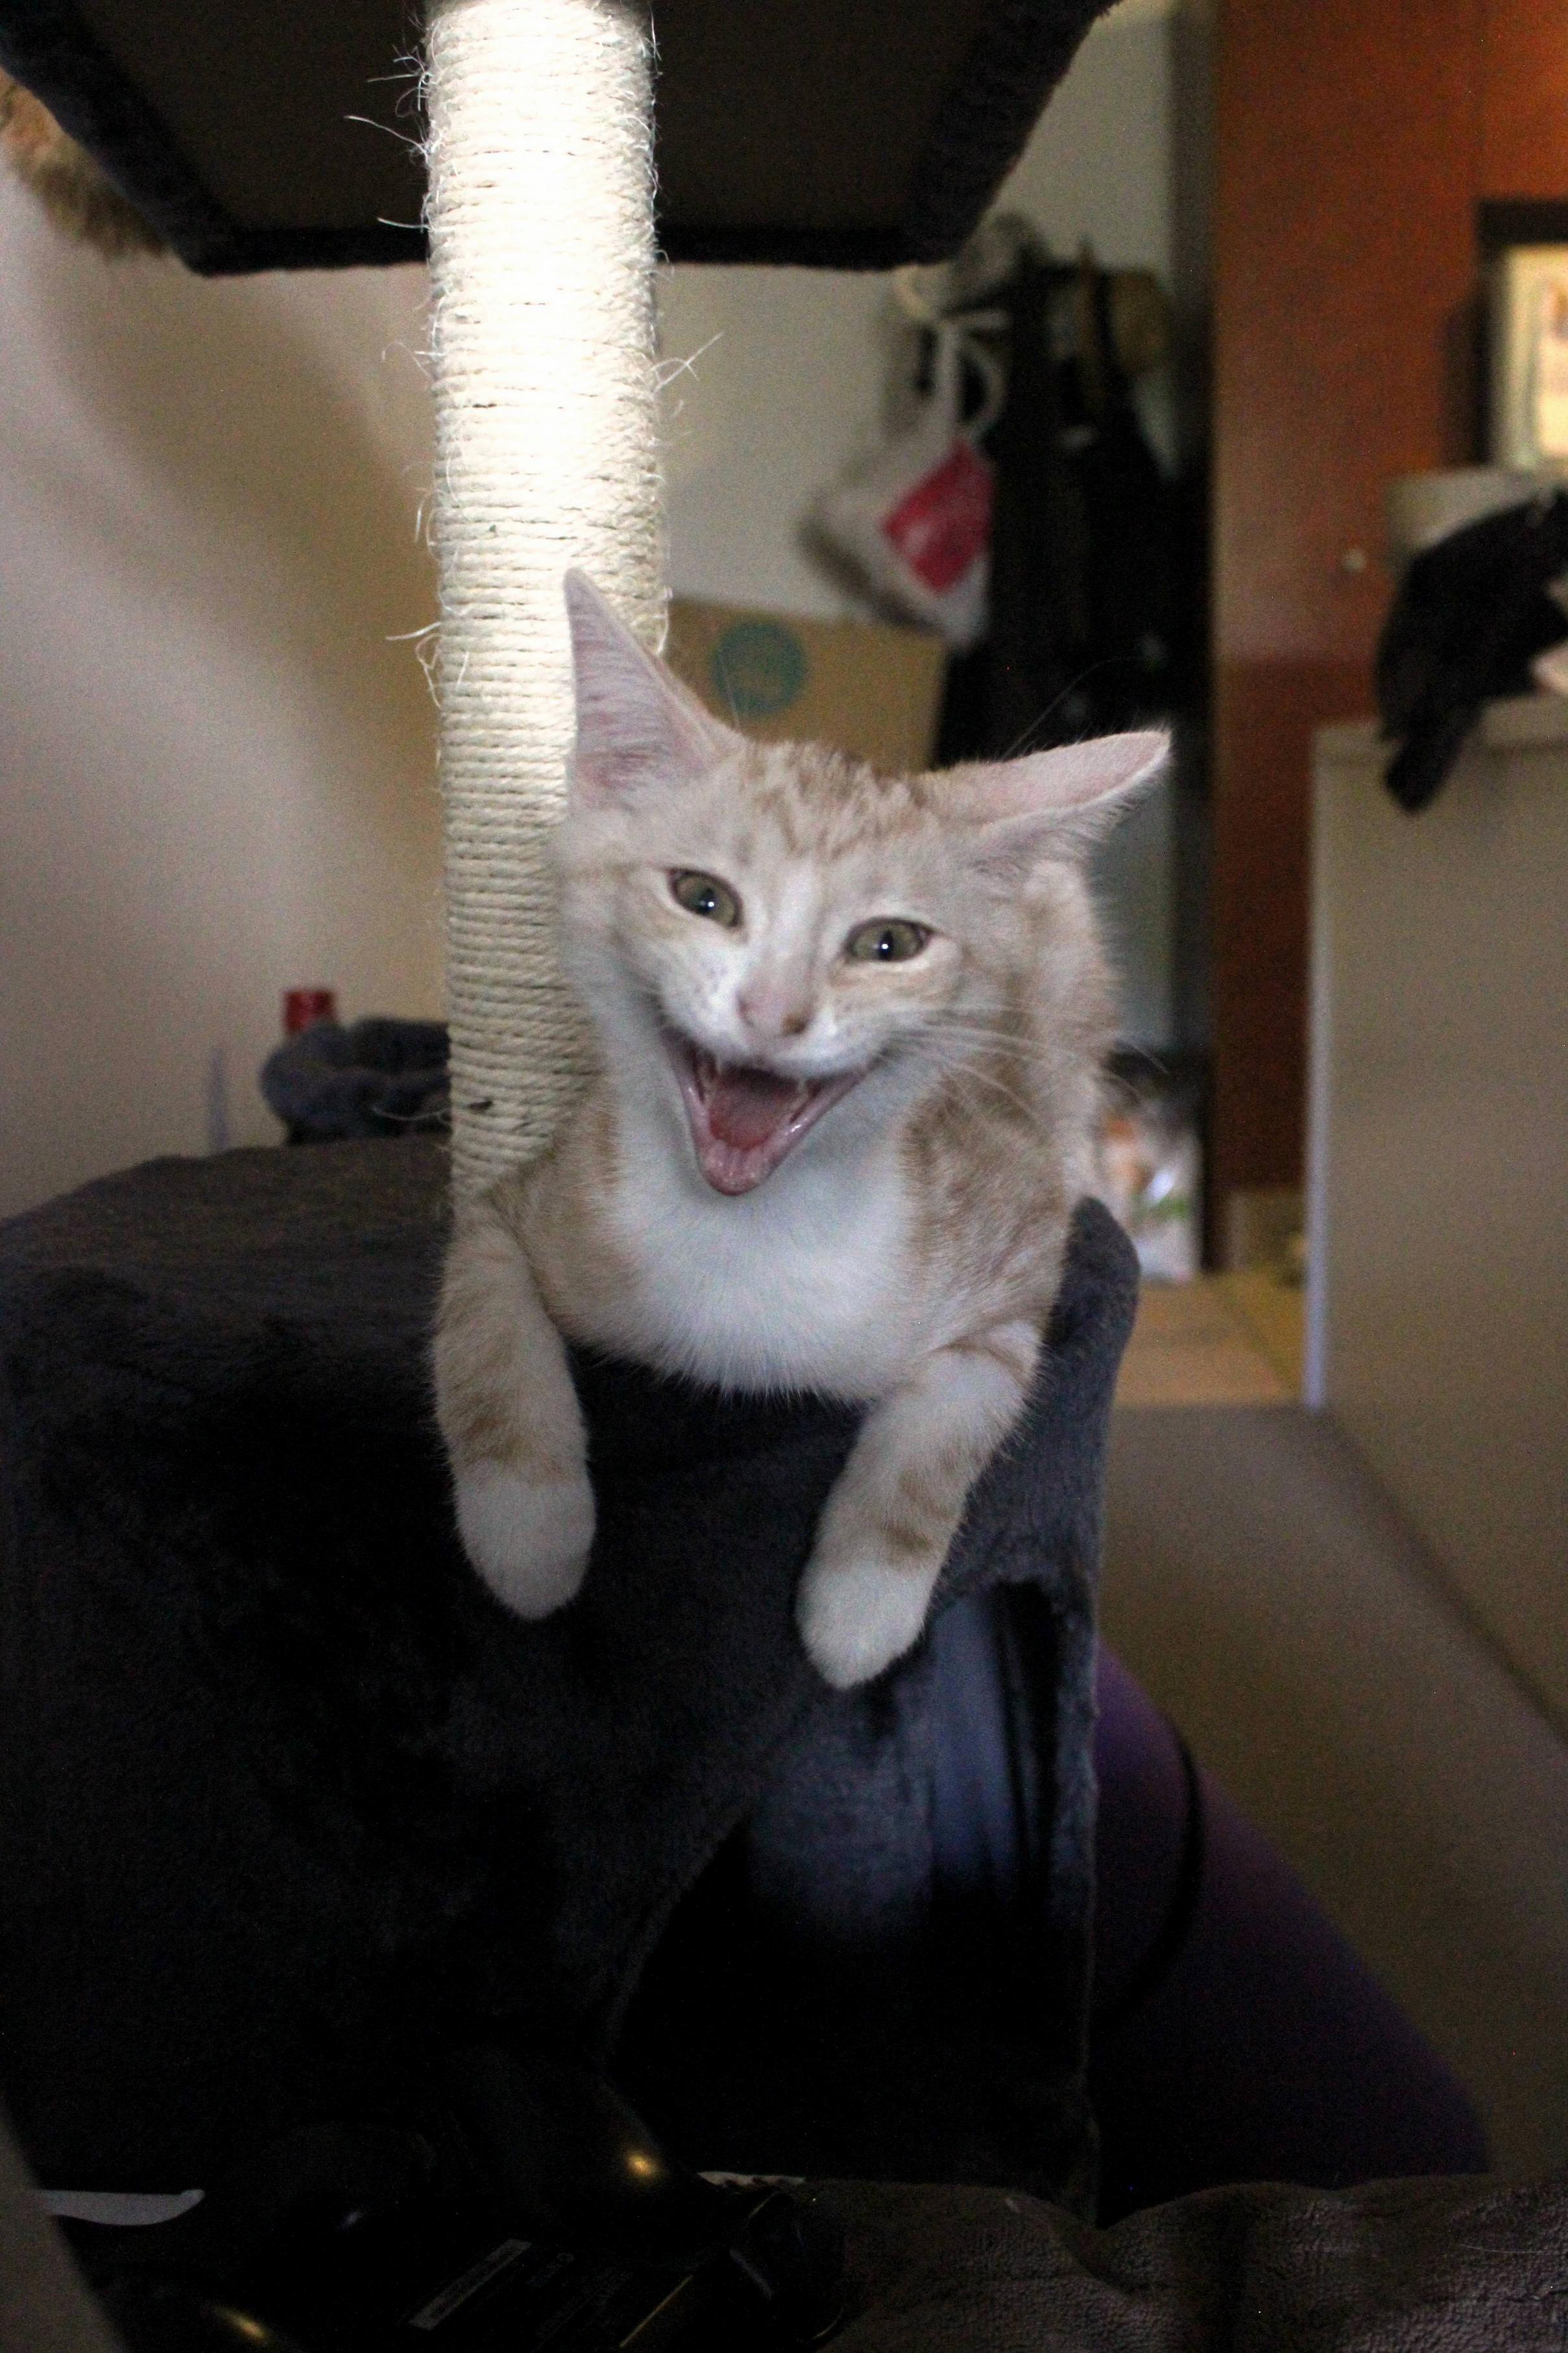 Snapped our kitten mid yawn – result is a little terrifying